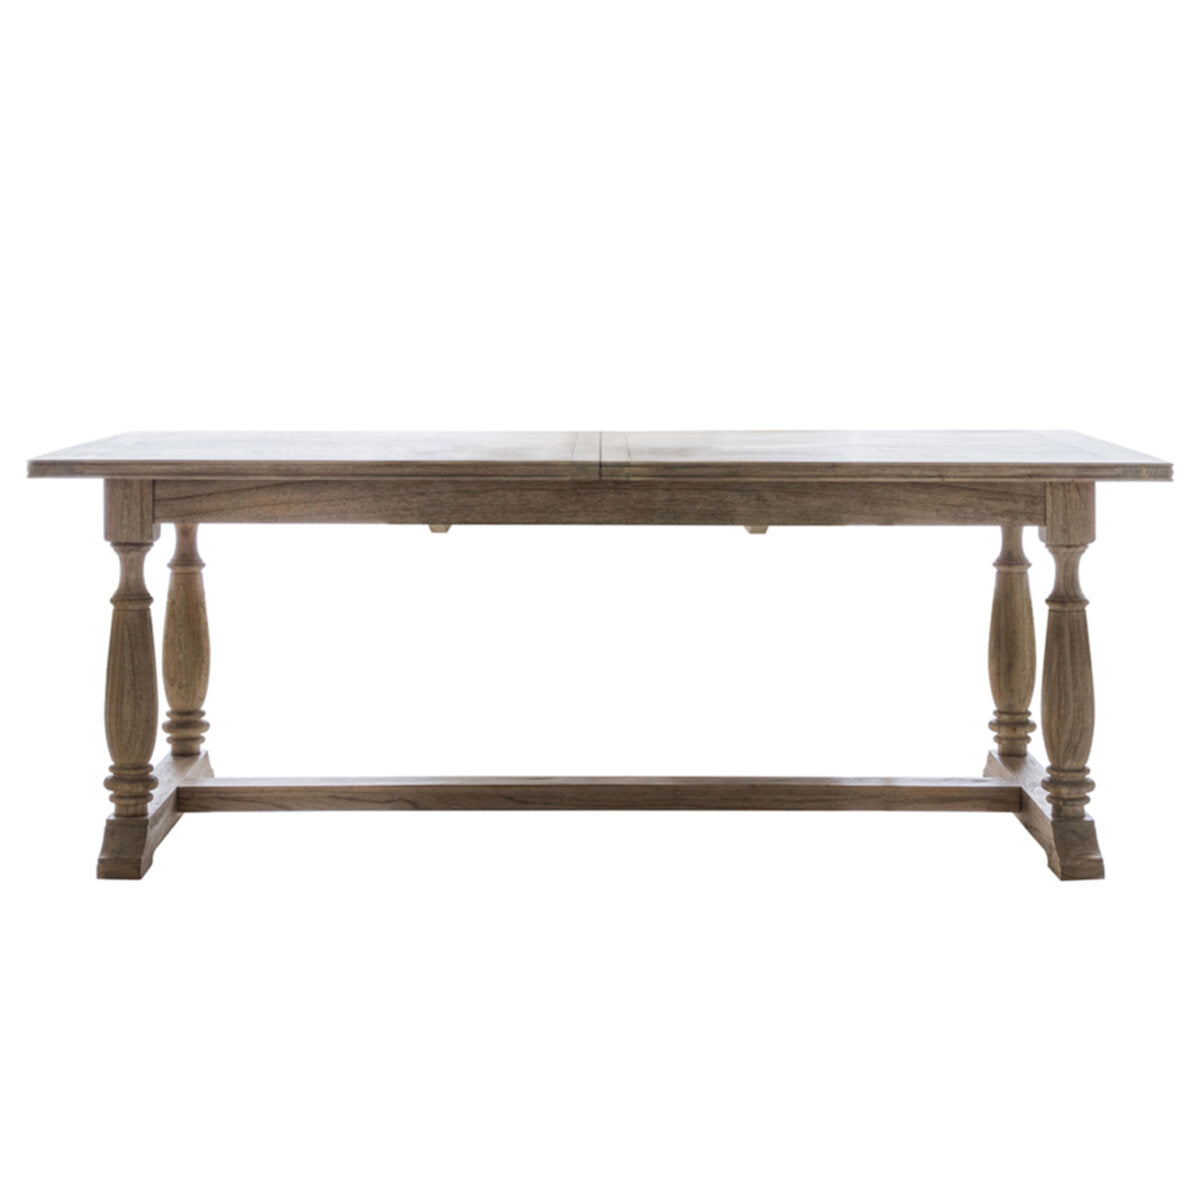 Colonial Parquet Inlay Extending Dining Table